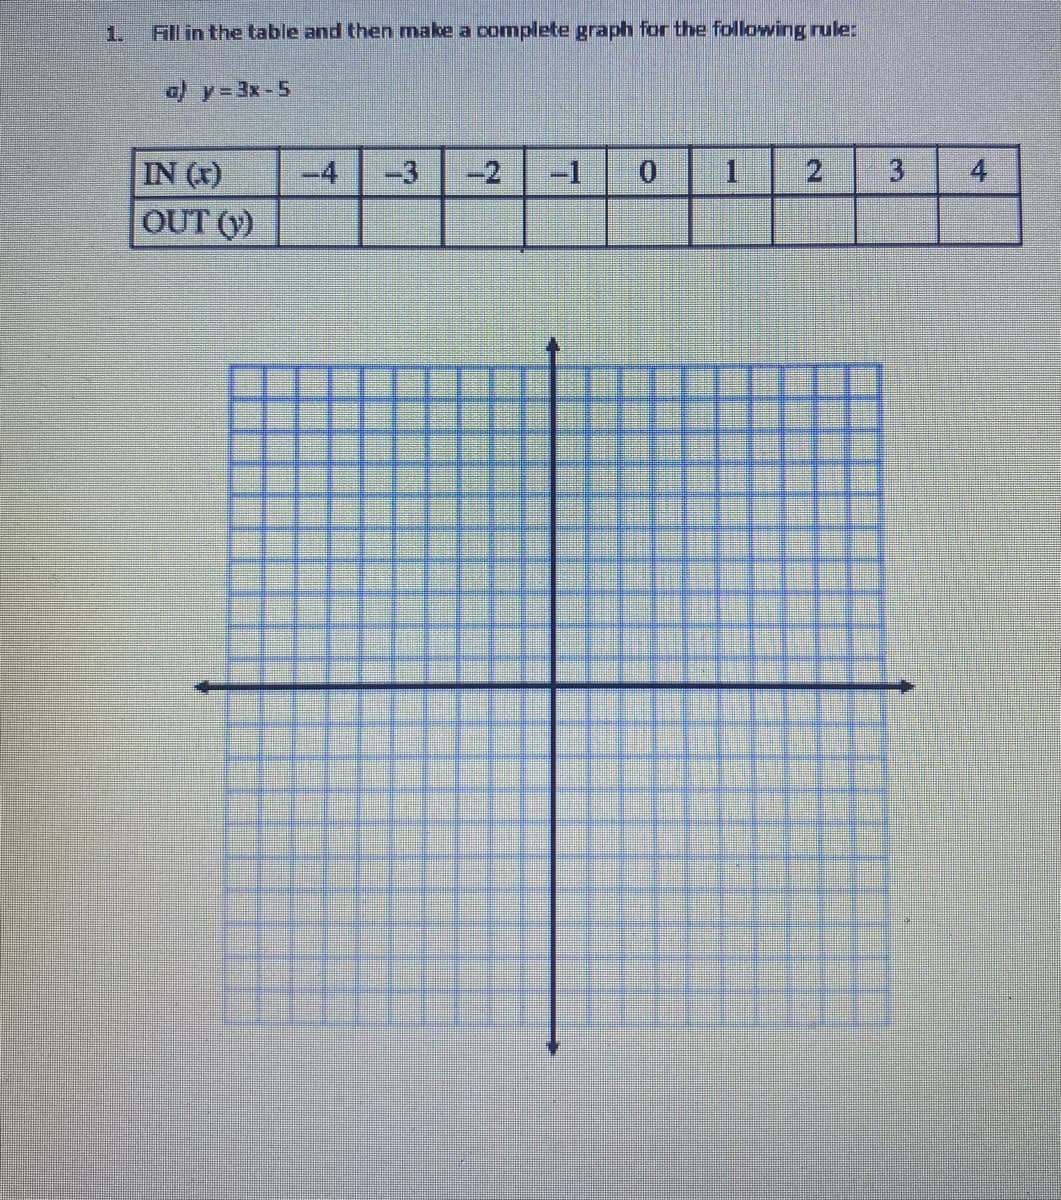 1.
Fill in the table and then mnake a complete graph for the following rule:
a) y=3x-5
IN (x)
-4
-3
-2
-1
0.
3
OUT (Y)
4,
